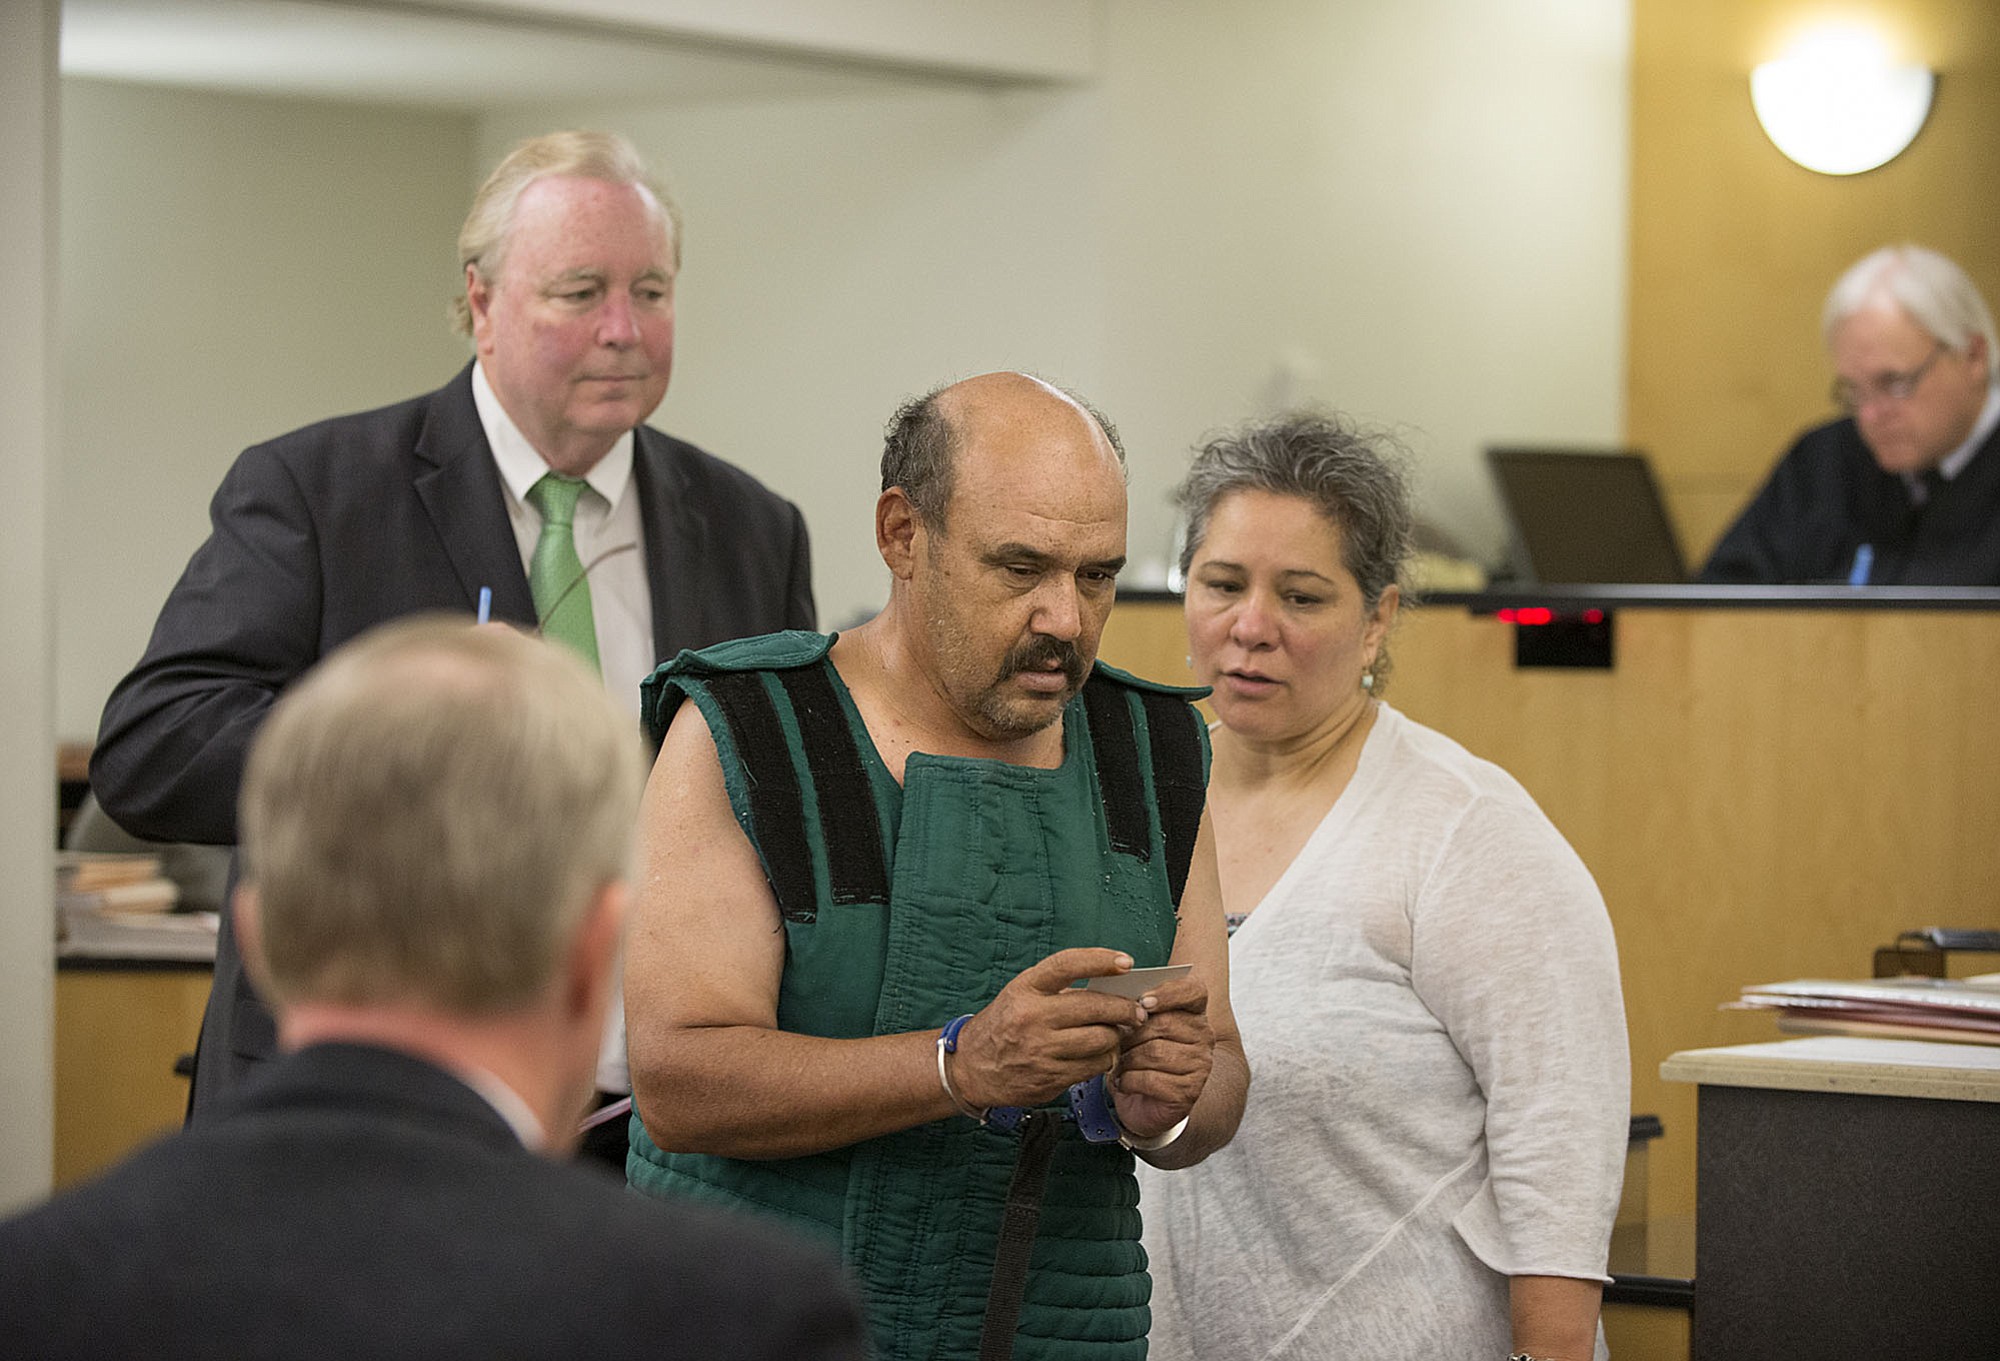 Samuel U. Morales of Woodland, center, makes a first appearance Friday in Clark County Superior Court after allegedly setting fires along Interstate 5 south of Ridgefield on Wednesday.